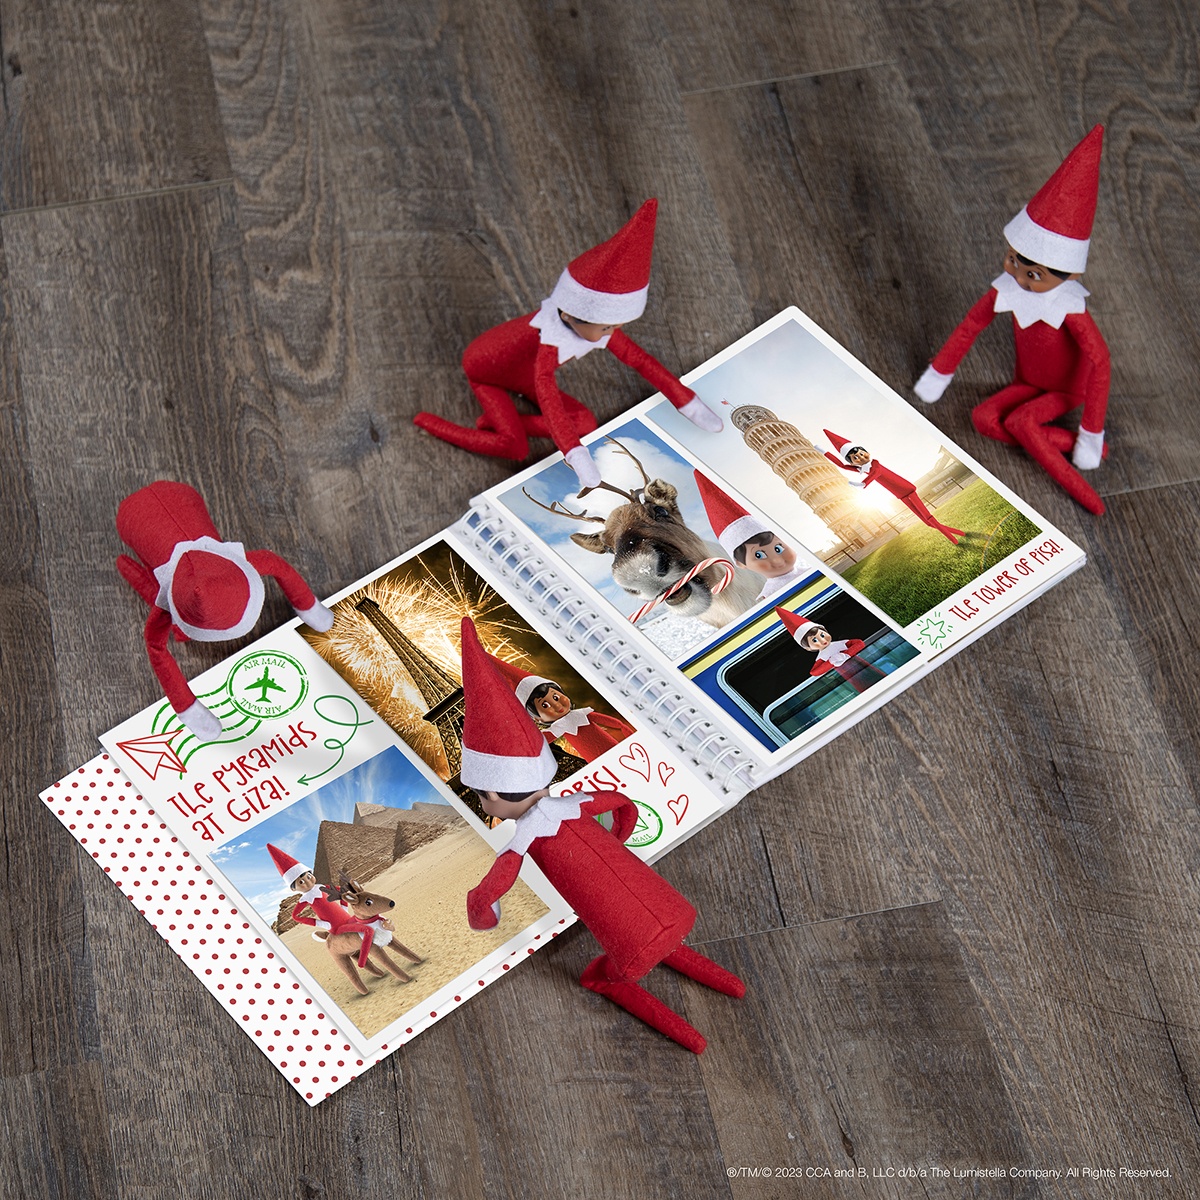 The Elf on the Shelf and friends looking through a scrapbook full of travel photos.